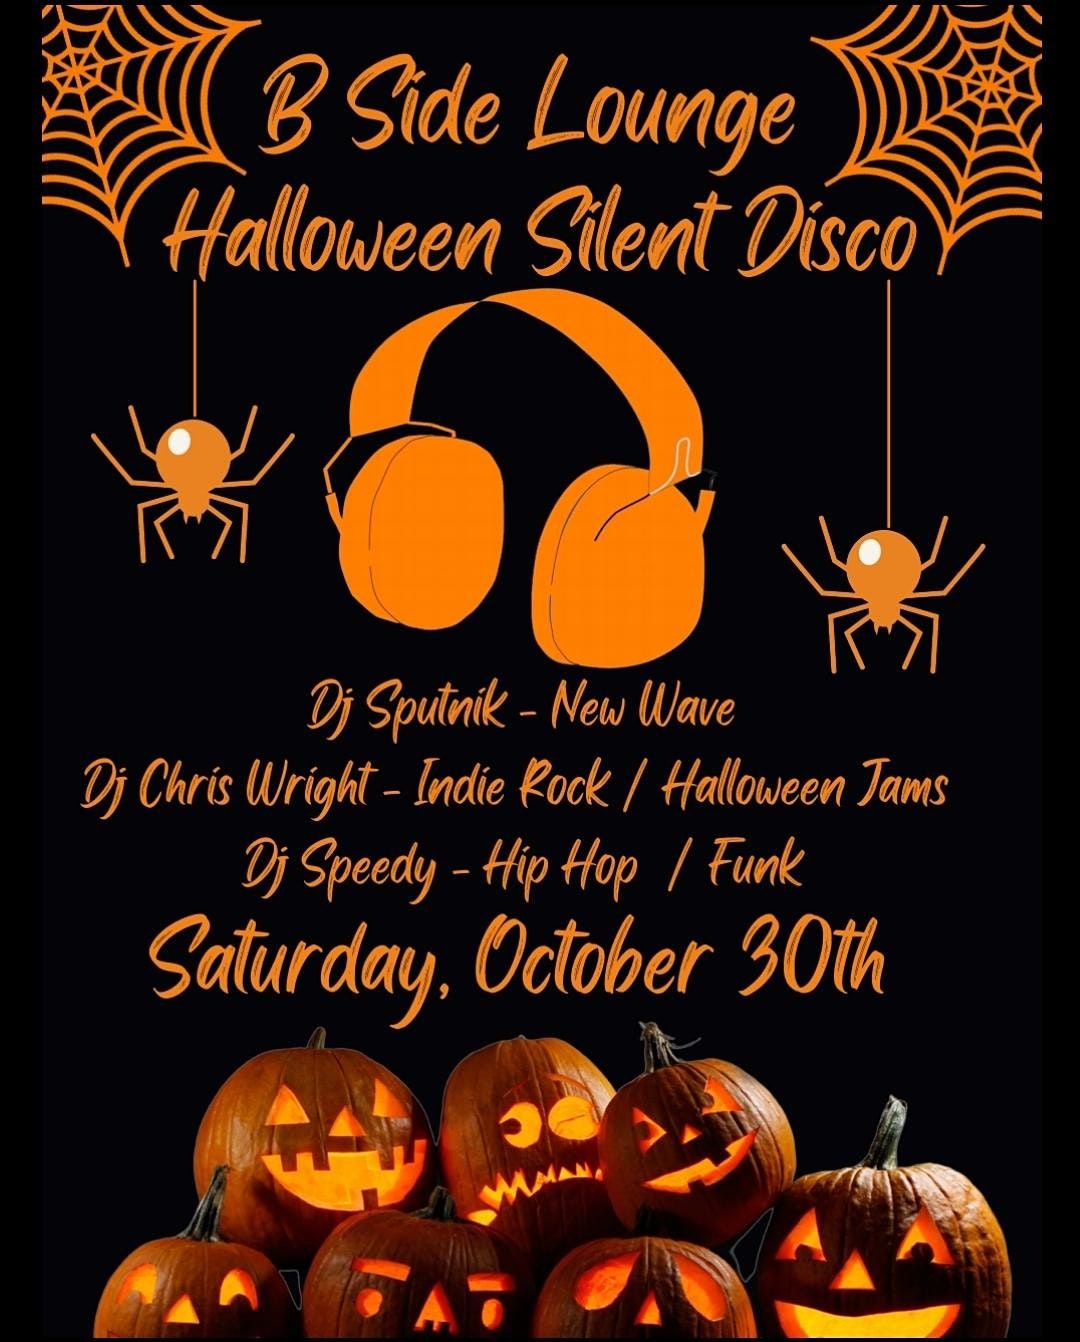 Halloween Silent Disco, B Side Lounge, CLEVELAND HEIGHTS, 30 October to